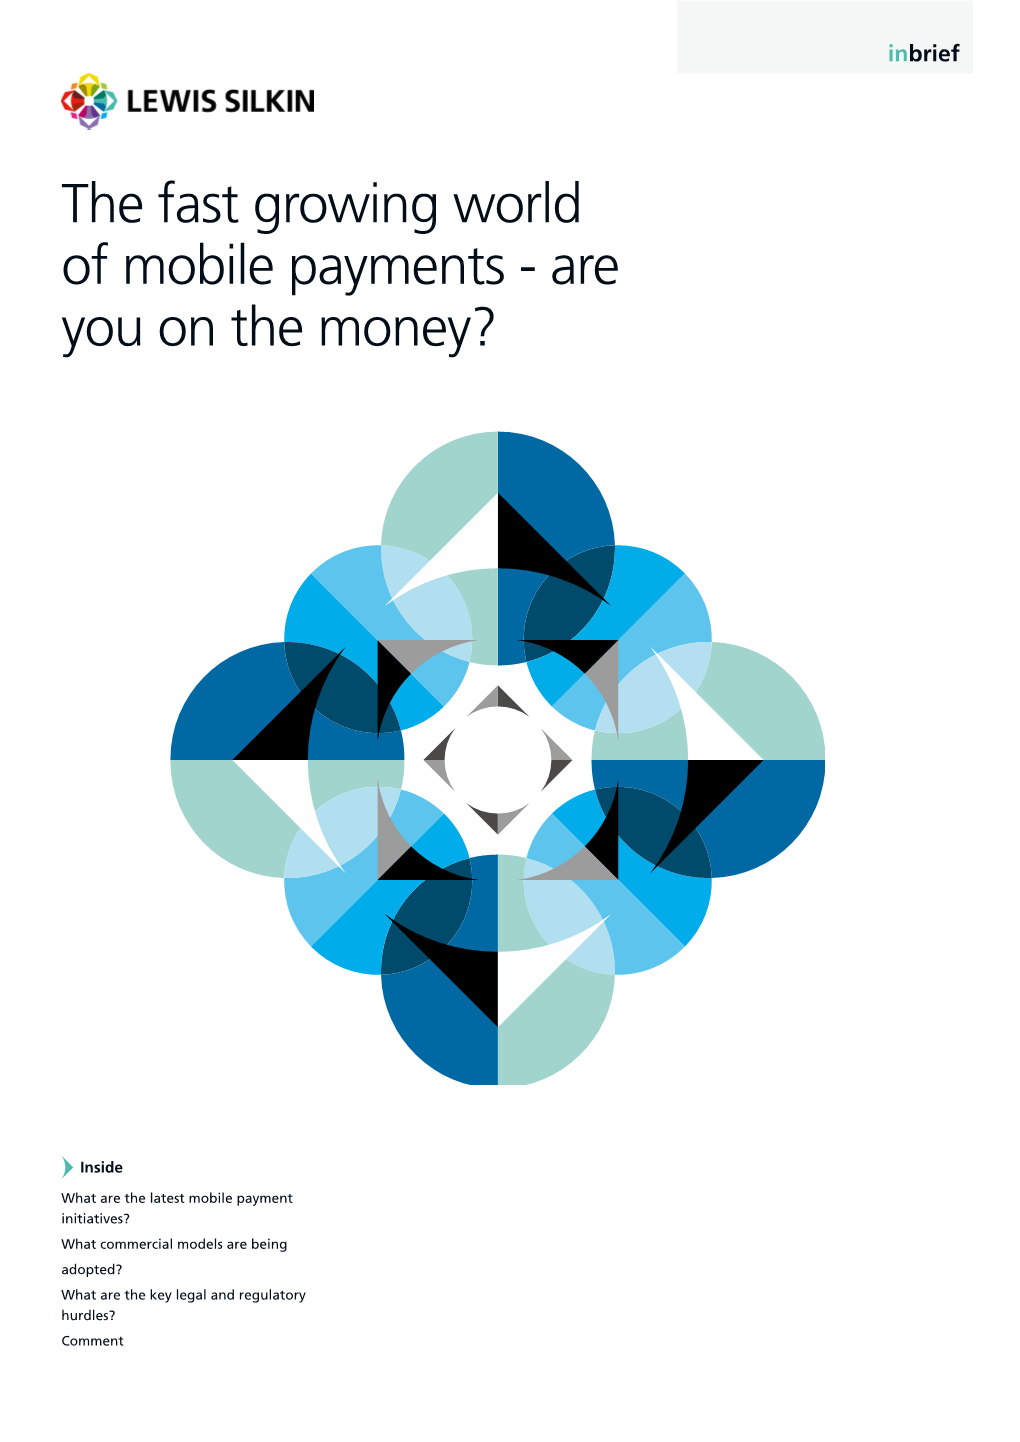 The Fast Growing World of Mobile Payments - Are You on the Money?